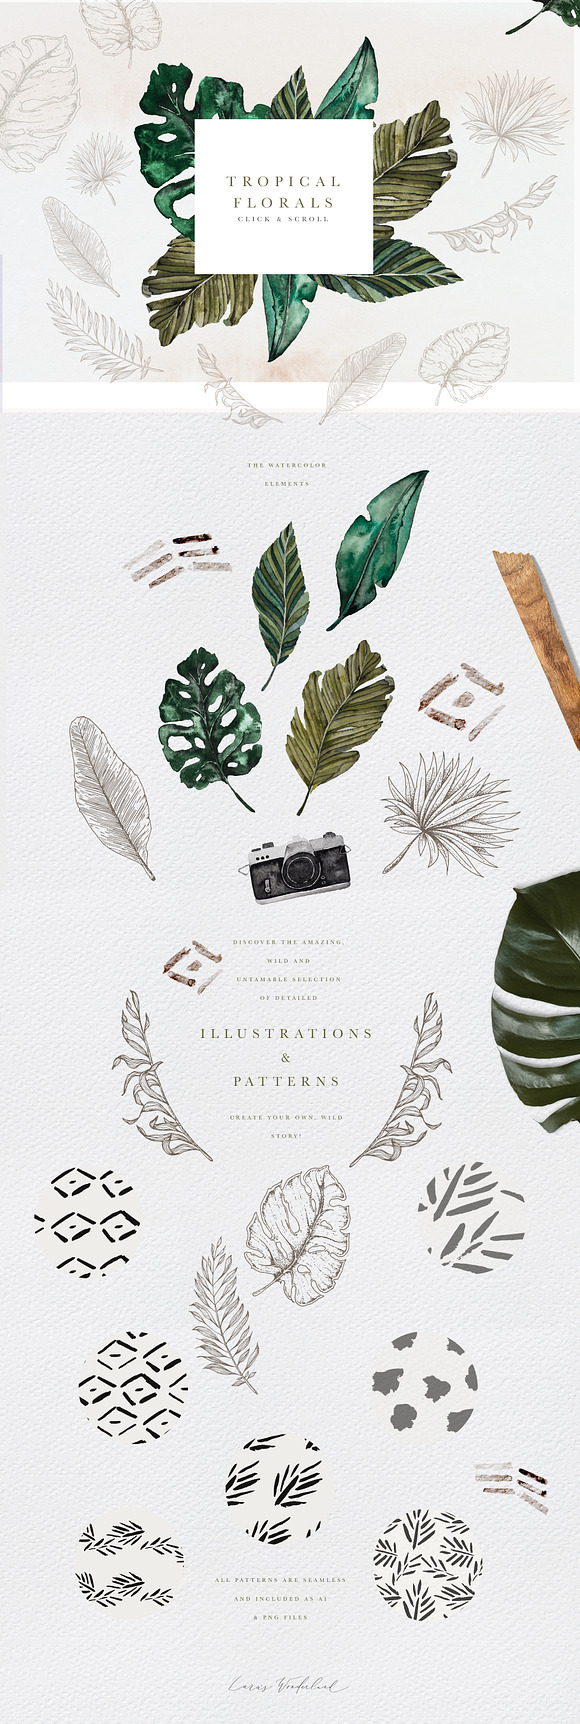 Tropical Ethno Watercolor & Patterns in Illustrations - product preview 6